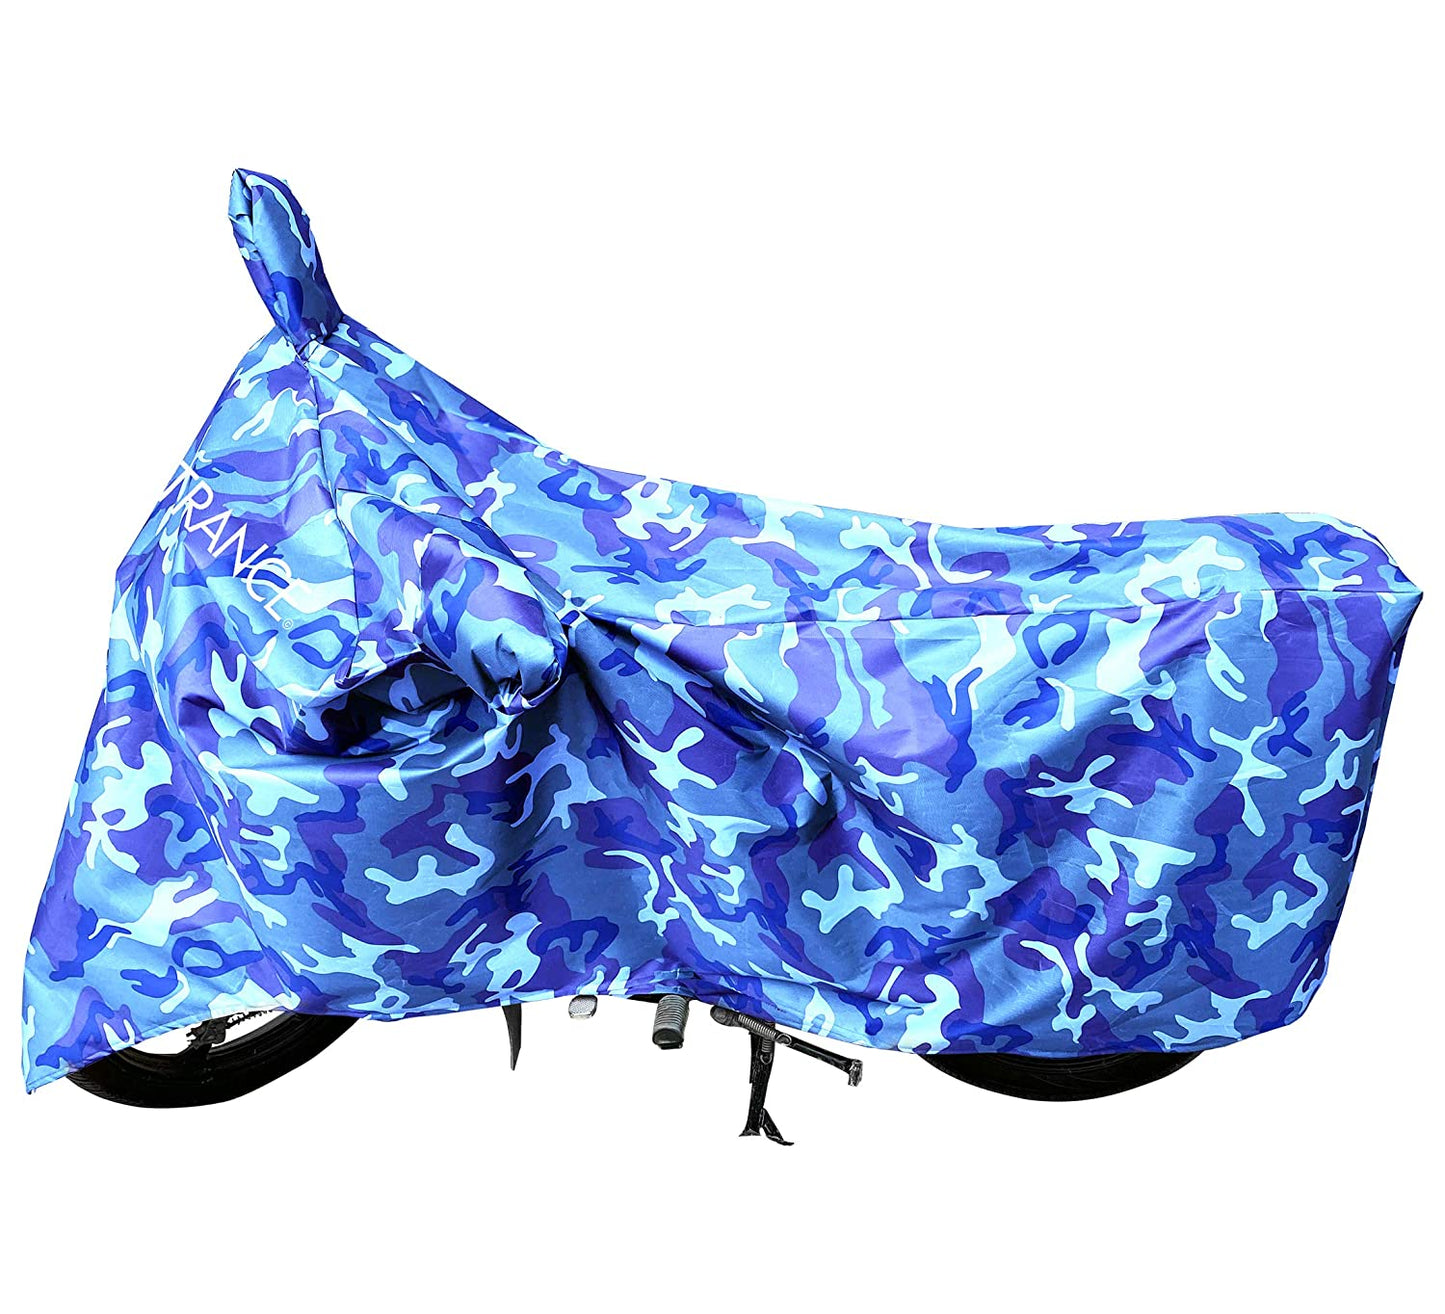 MotoTrance Jungle Bike Body Covers For Techo Electra Neo 2019 - Interlock-Stitched Waterproof and Heat Resistant with Mirror Pockets